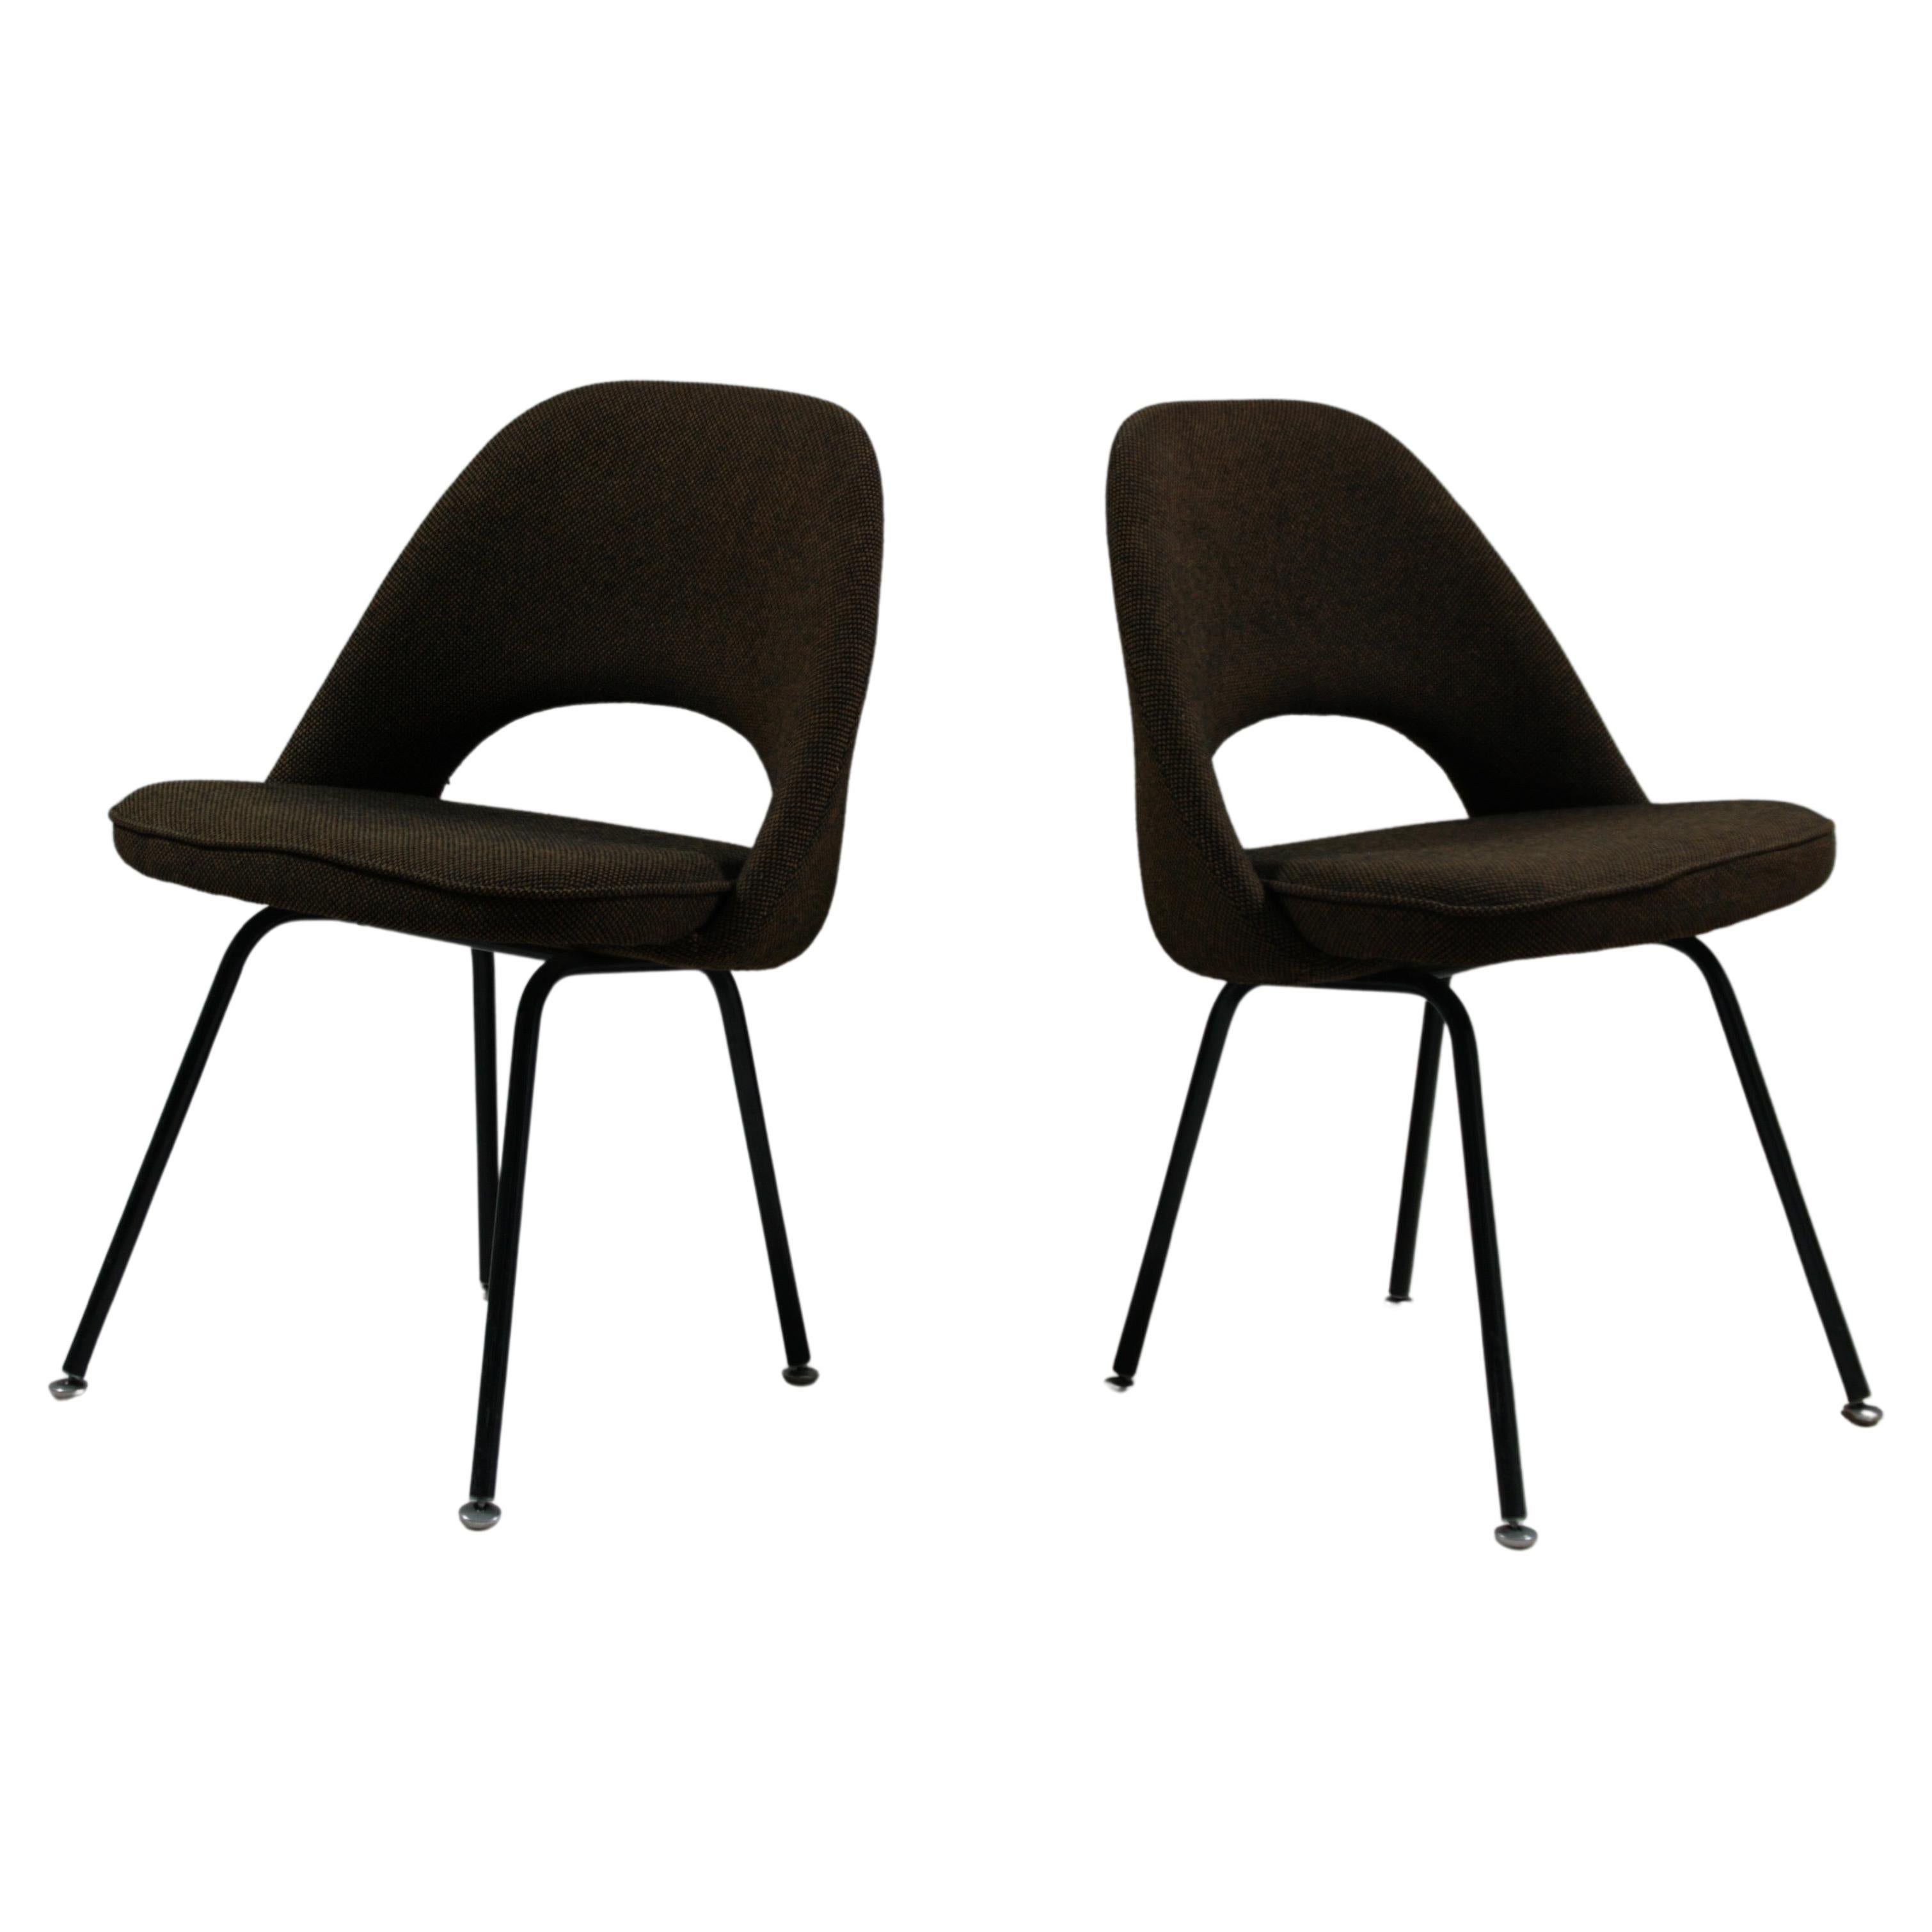 Pair of Conference Chairs by Eero Saarinen, Knoll International, 1960 For Sale